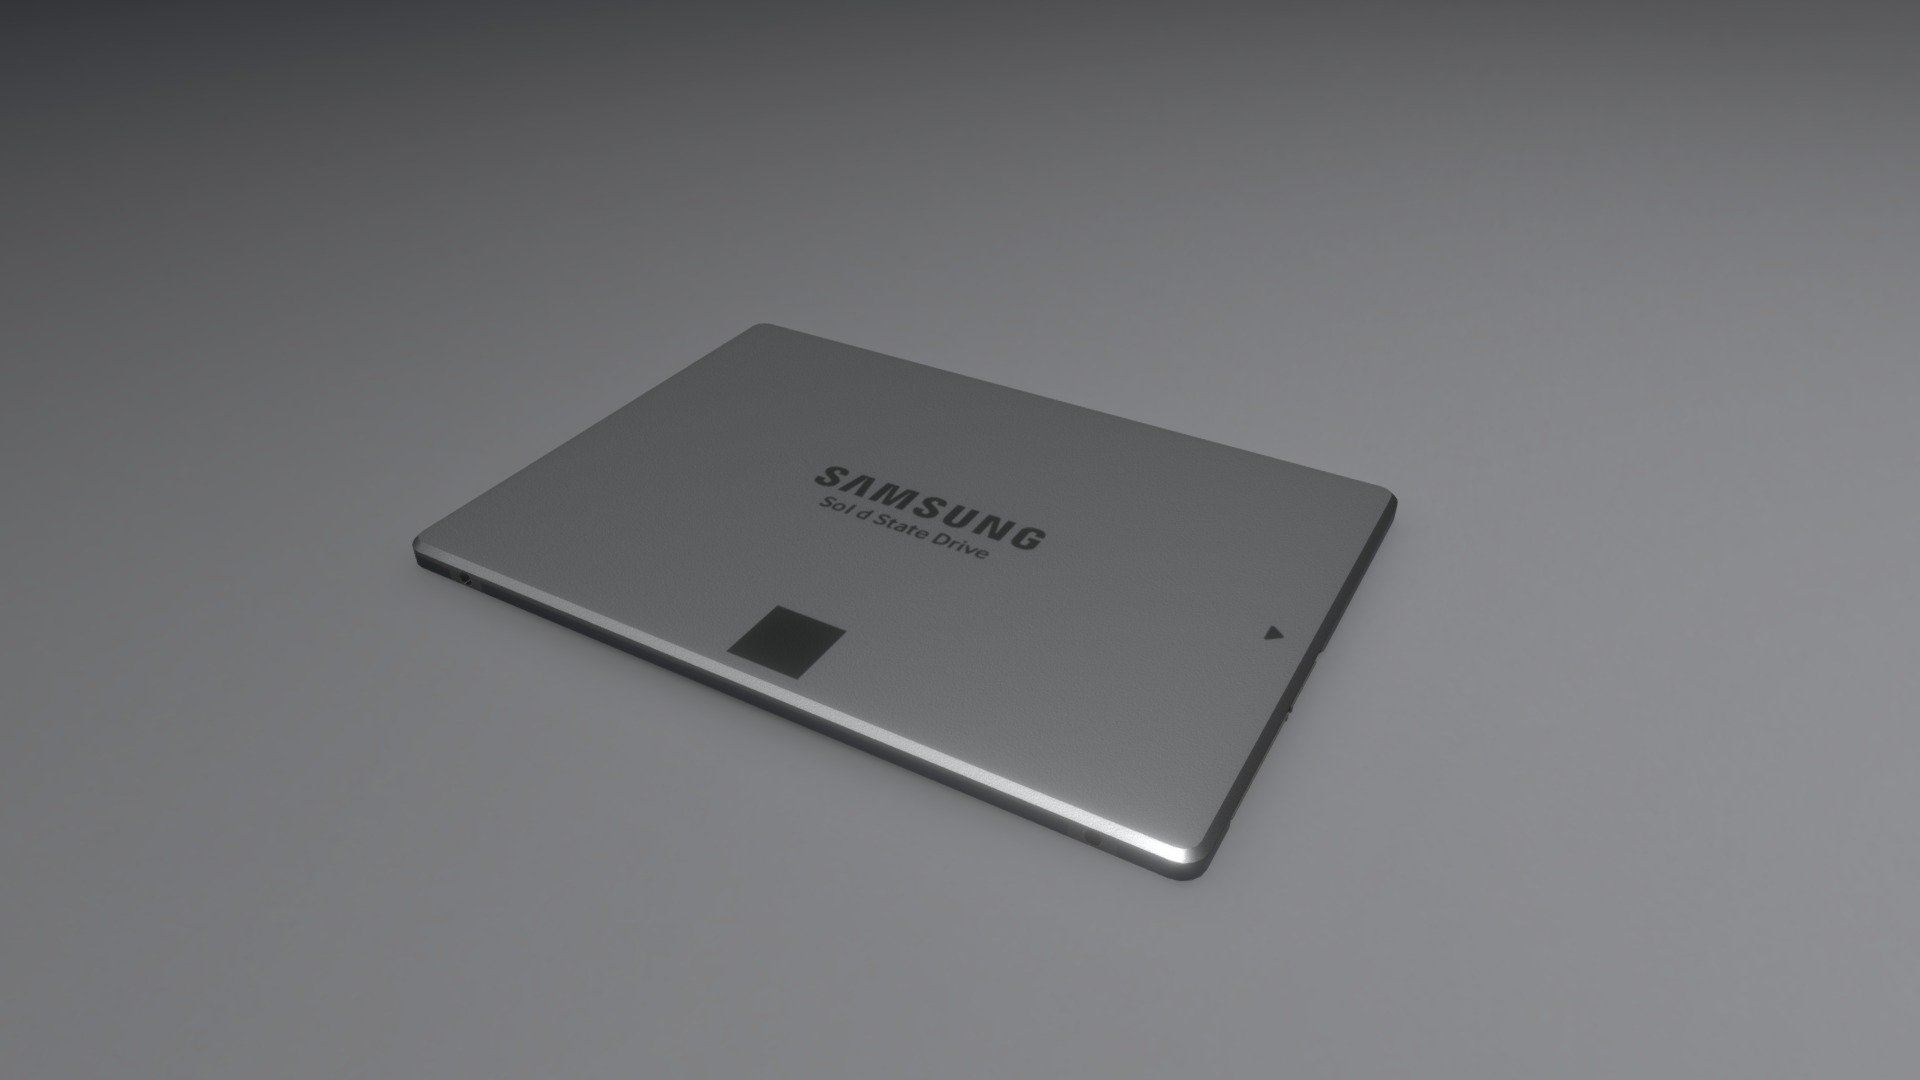 This is a 3D mock up of an Samsung SSD that I am using for my professional awareness assignment at University made in Blender 3.0 3d model